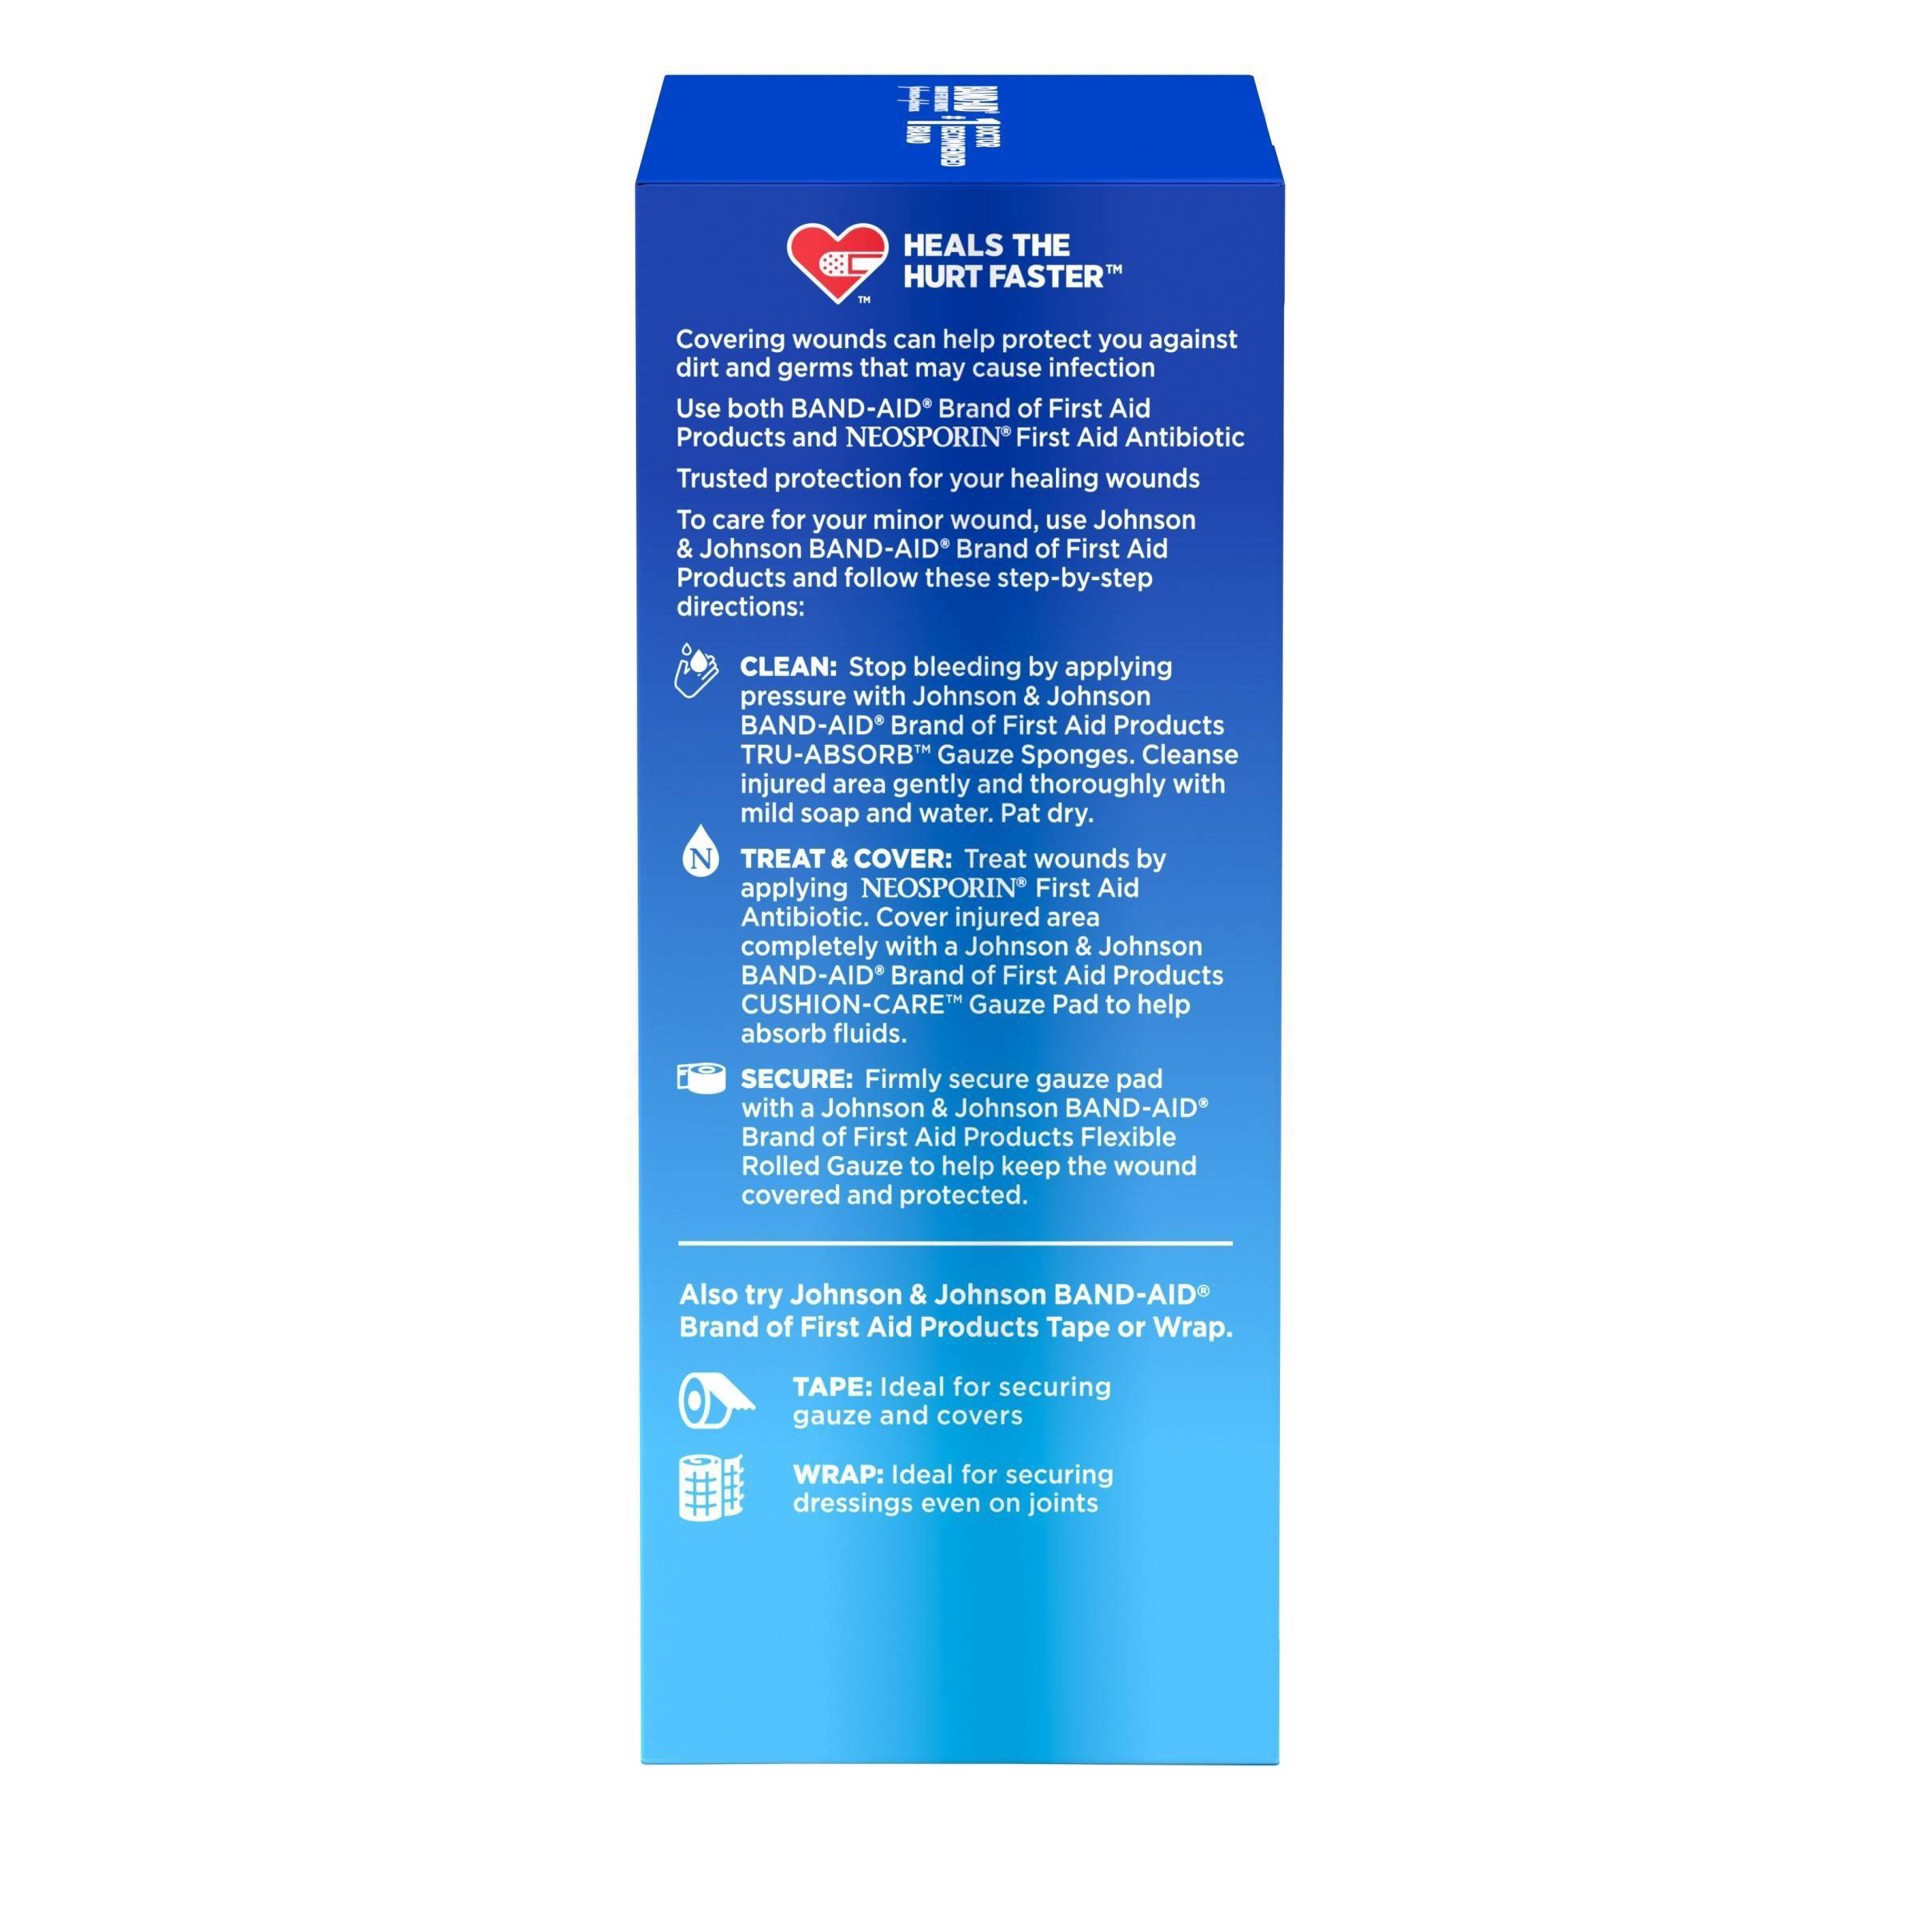 slide 6 of 15, BAND-AID Band Aid Brand of First Aid Products Flexible Rolled Gauze Dressing for Minor Wound Care, soft Padding and Instant Absorption, 4 Inches by 2.5 Yards, 1 ct